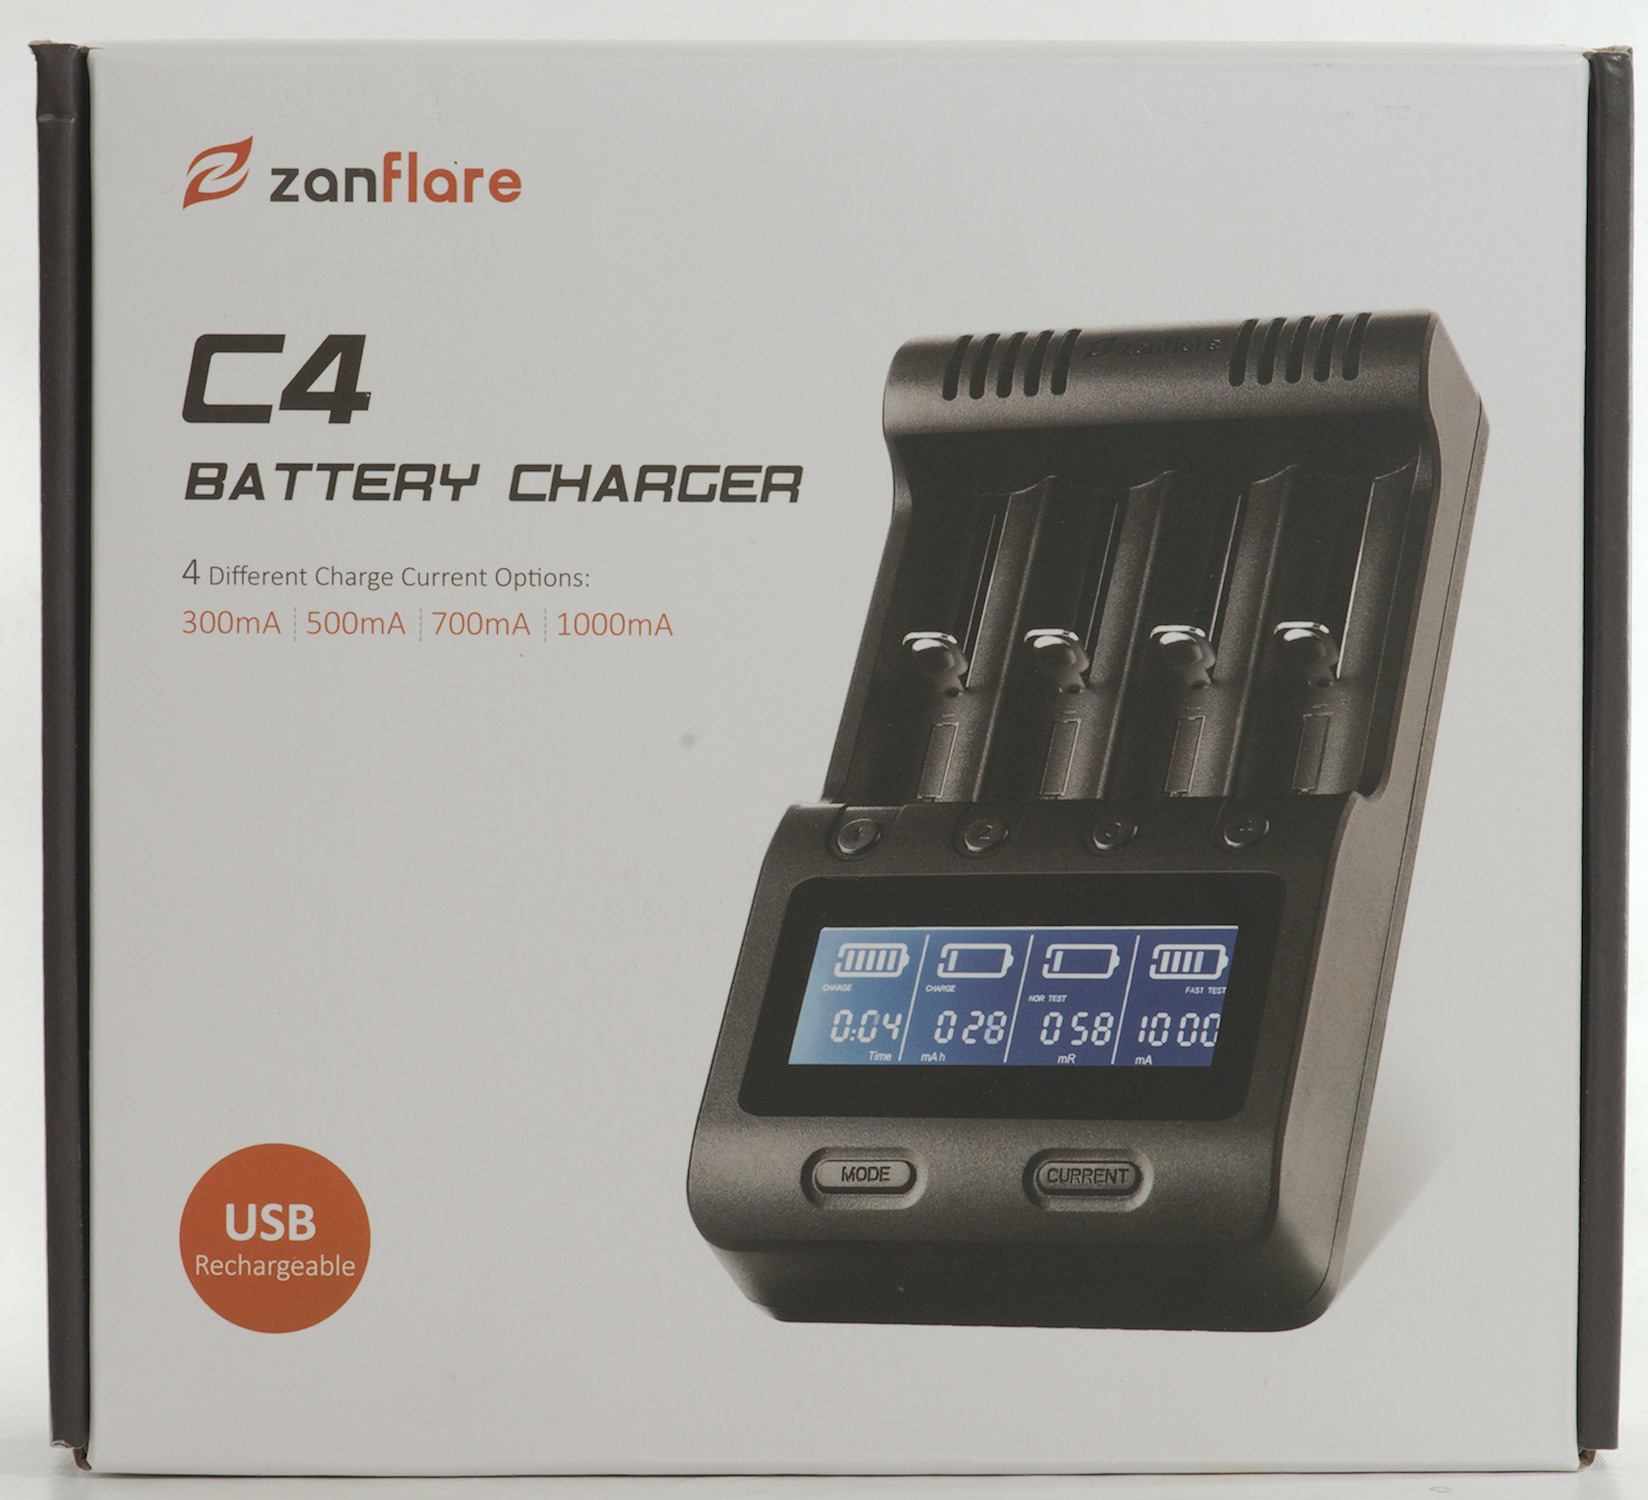 Zanflare C4 SmartLCD Display Speedy Universal Battery Charger with Car Adapter 